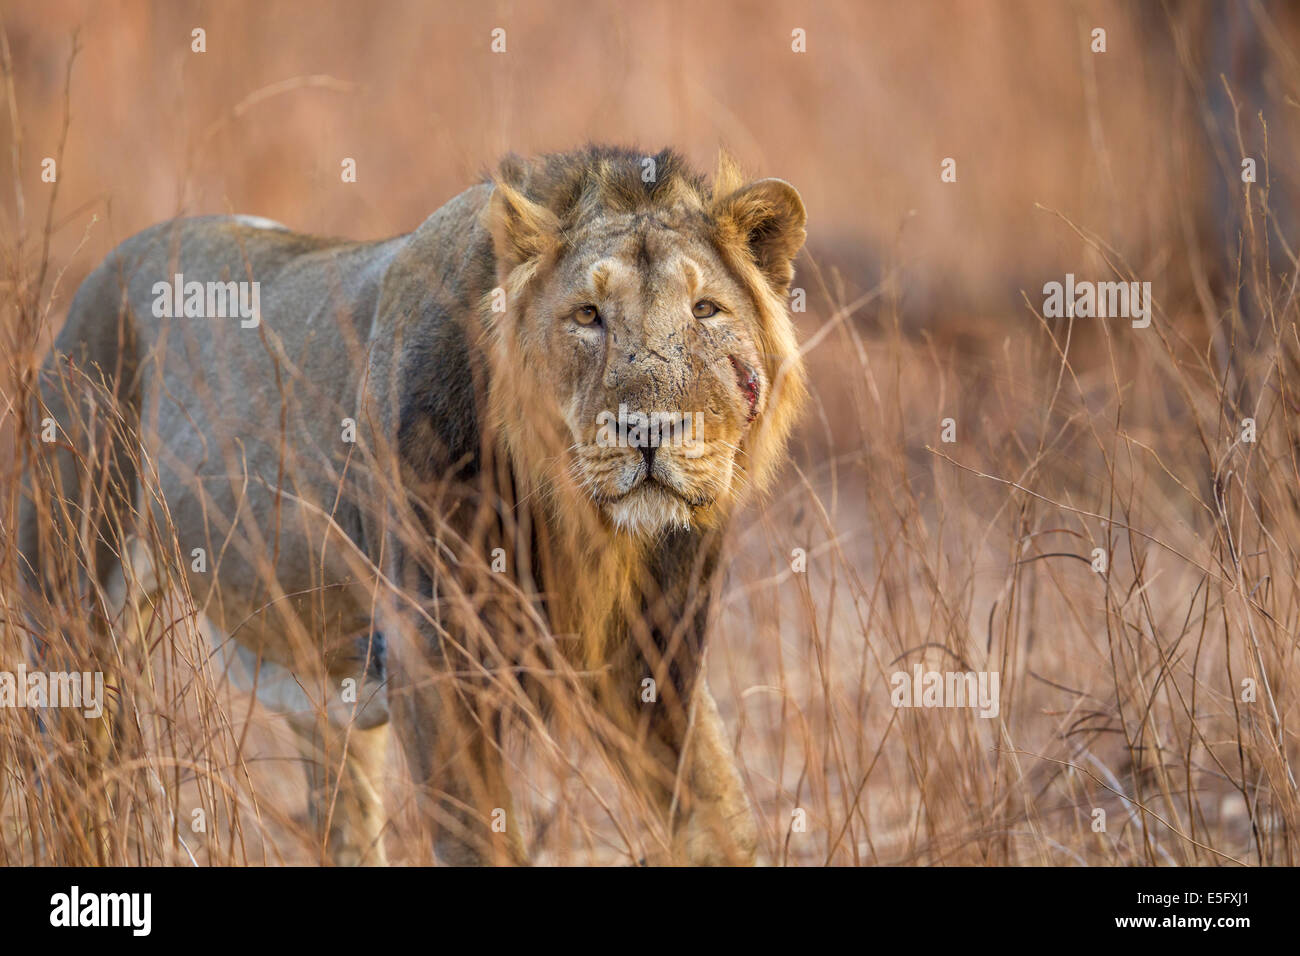 Asiatic Lion male (Panthera leo persica) at Gir forest, Gujarat, India. Stock Photo